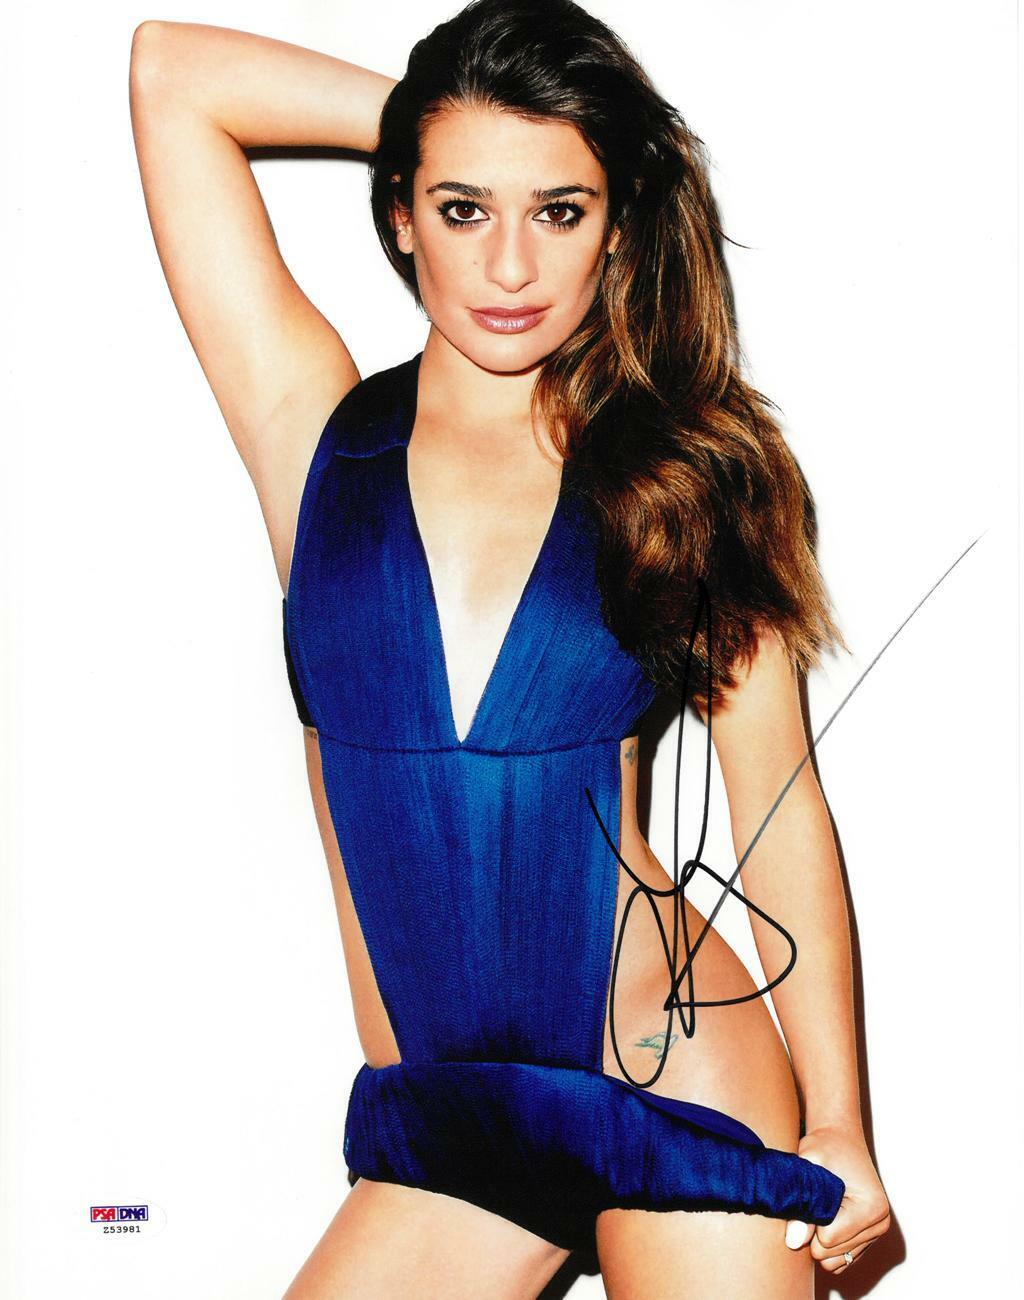 Lea Michele Signed Sexy Authentic Autographed 11x14 Photo Poster painting PSA/DNA #Z53981